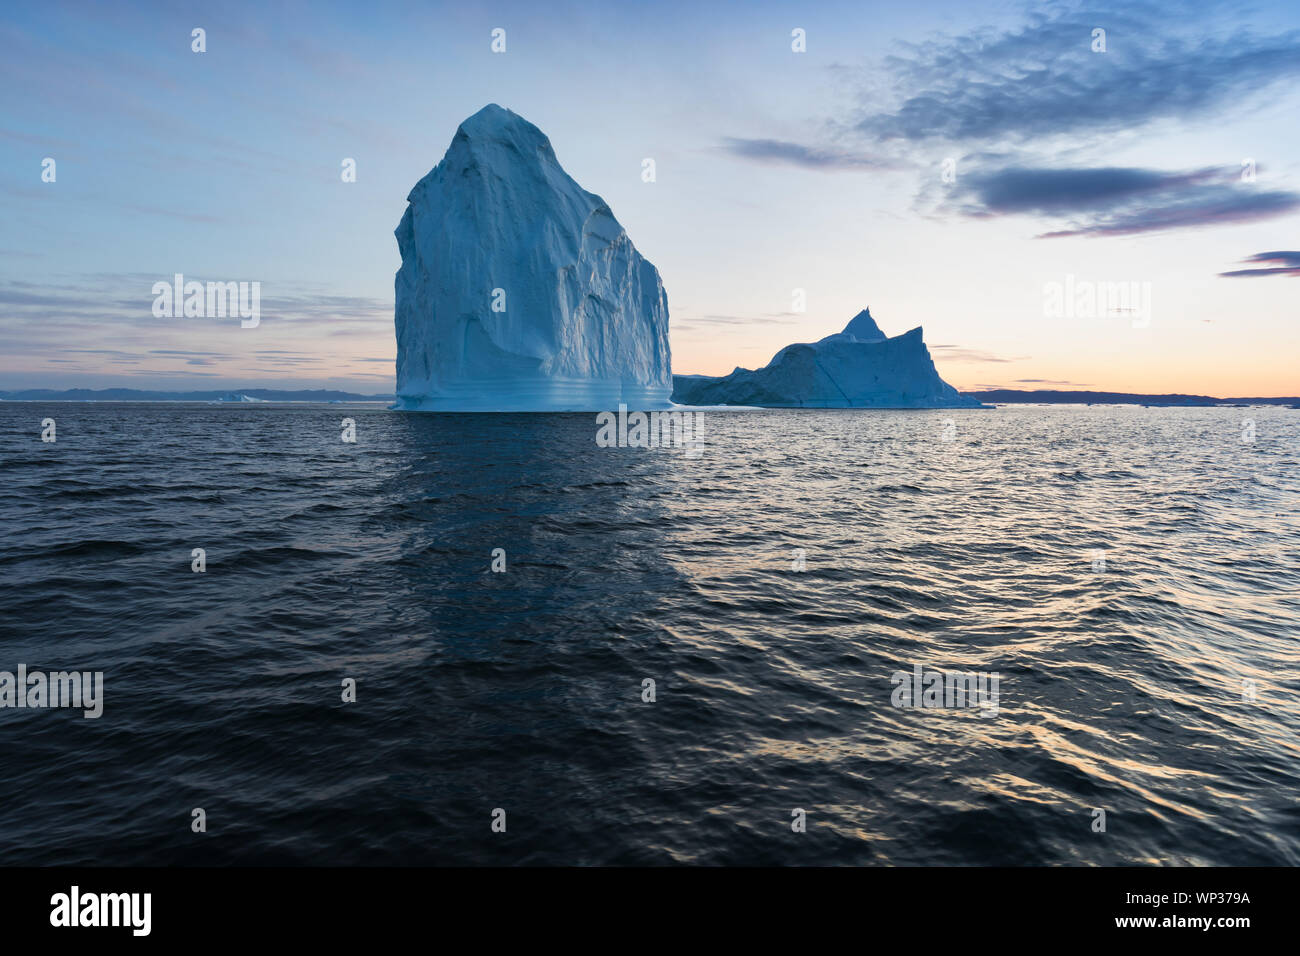 Icebergs in front of the fishing town Ilulissat in Greenland. Nature and landscapes of Greenland. Travel on the vessel among ices. Seascape Stock Photo